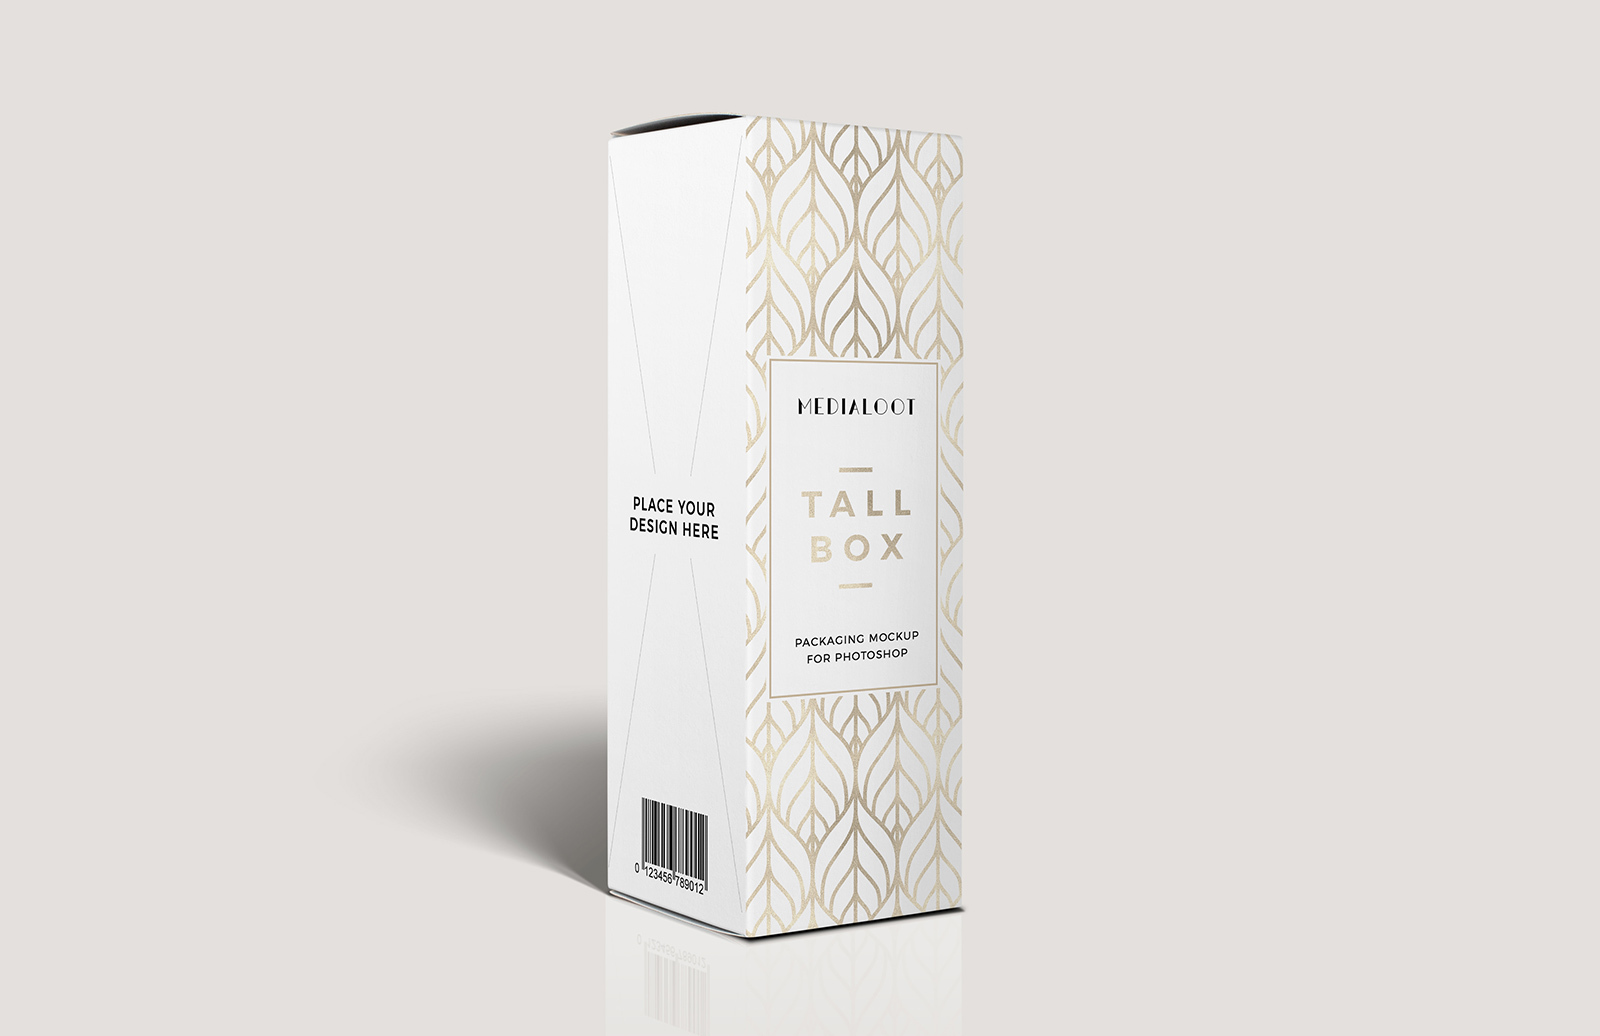 Download Tall Box Packaging Mockup For Photoshop Medialoot